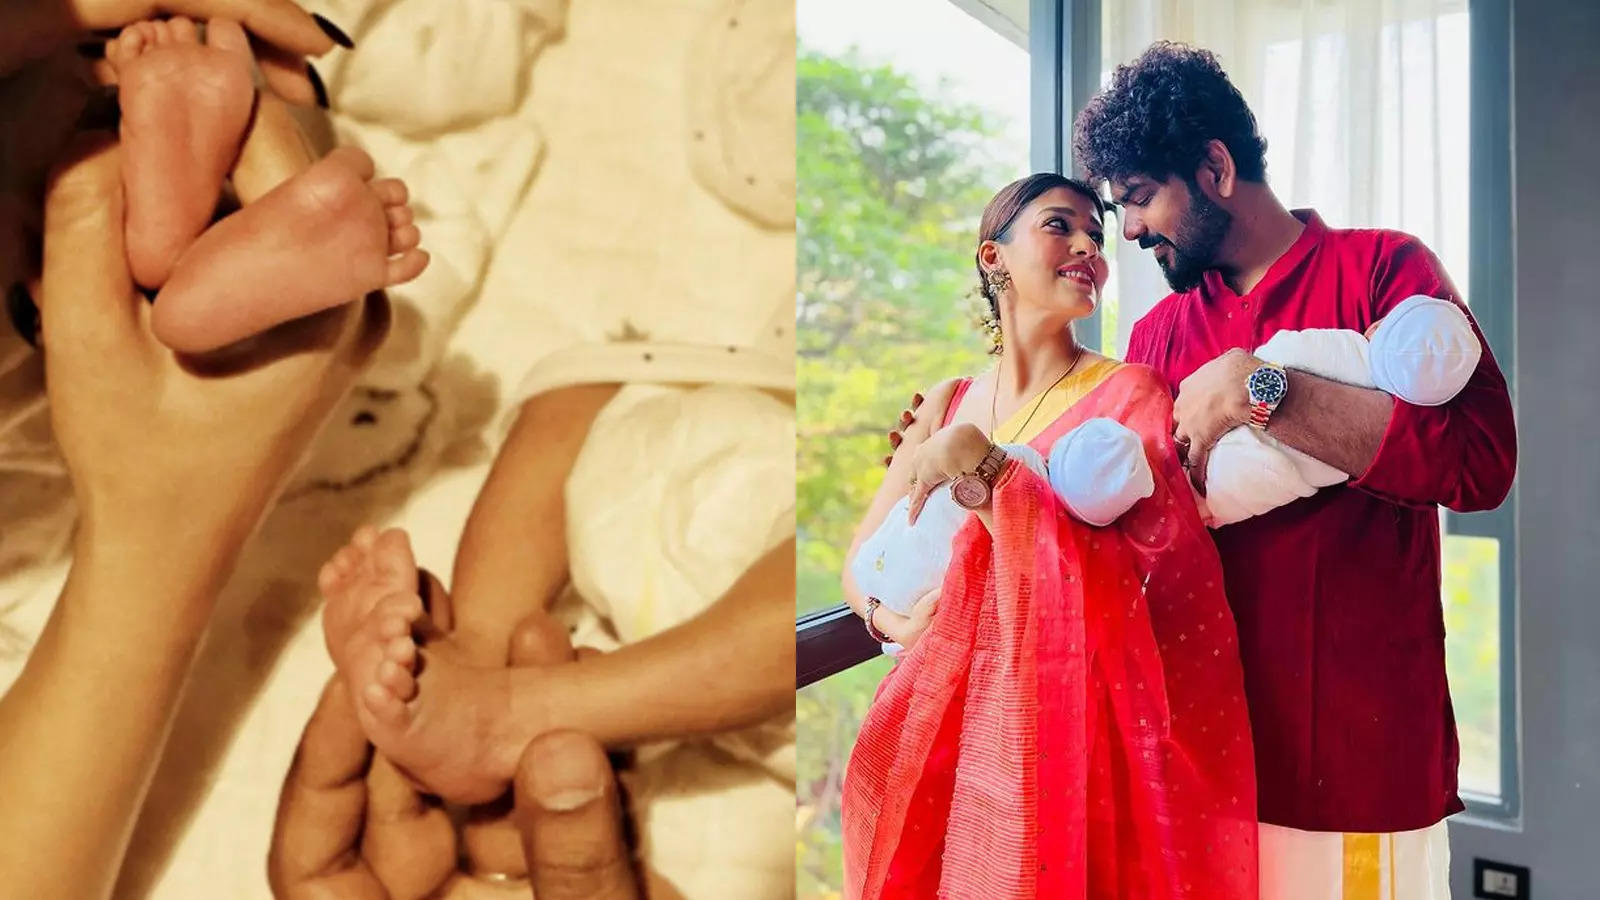 Nayanthara and Vignesh Shivan receive clean chit in surrogacy row; Tamil  Nadu govt panel states couple adhered to rules | Hindi Movie News -  Bollywood - Times of India